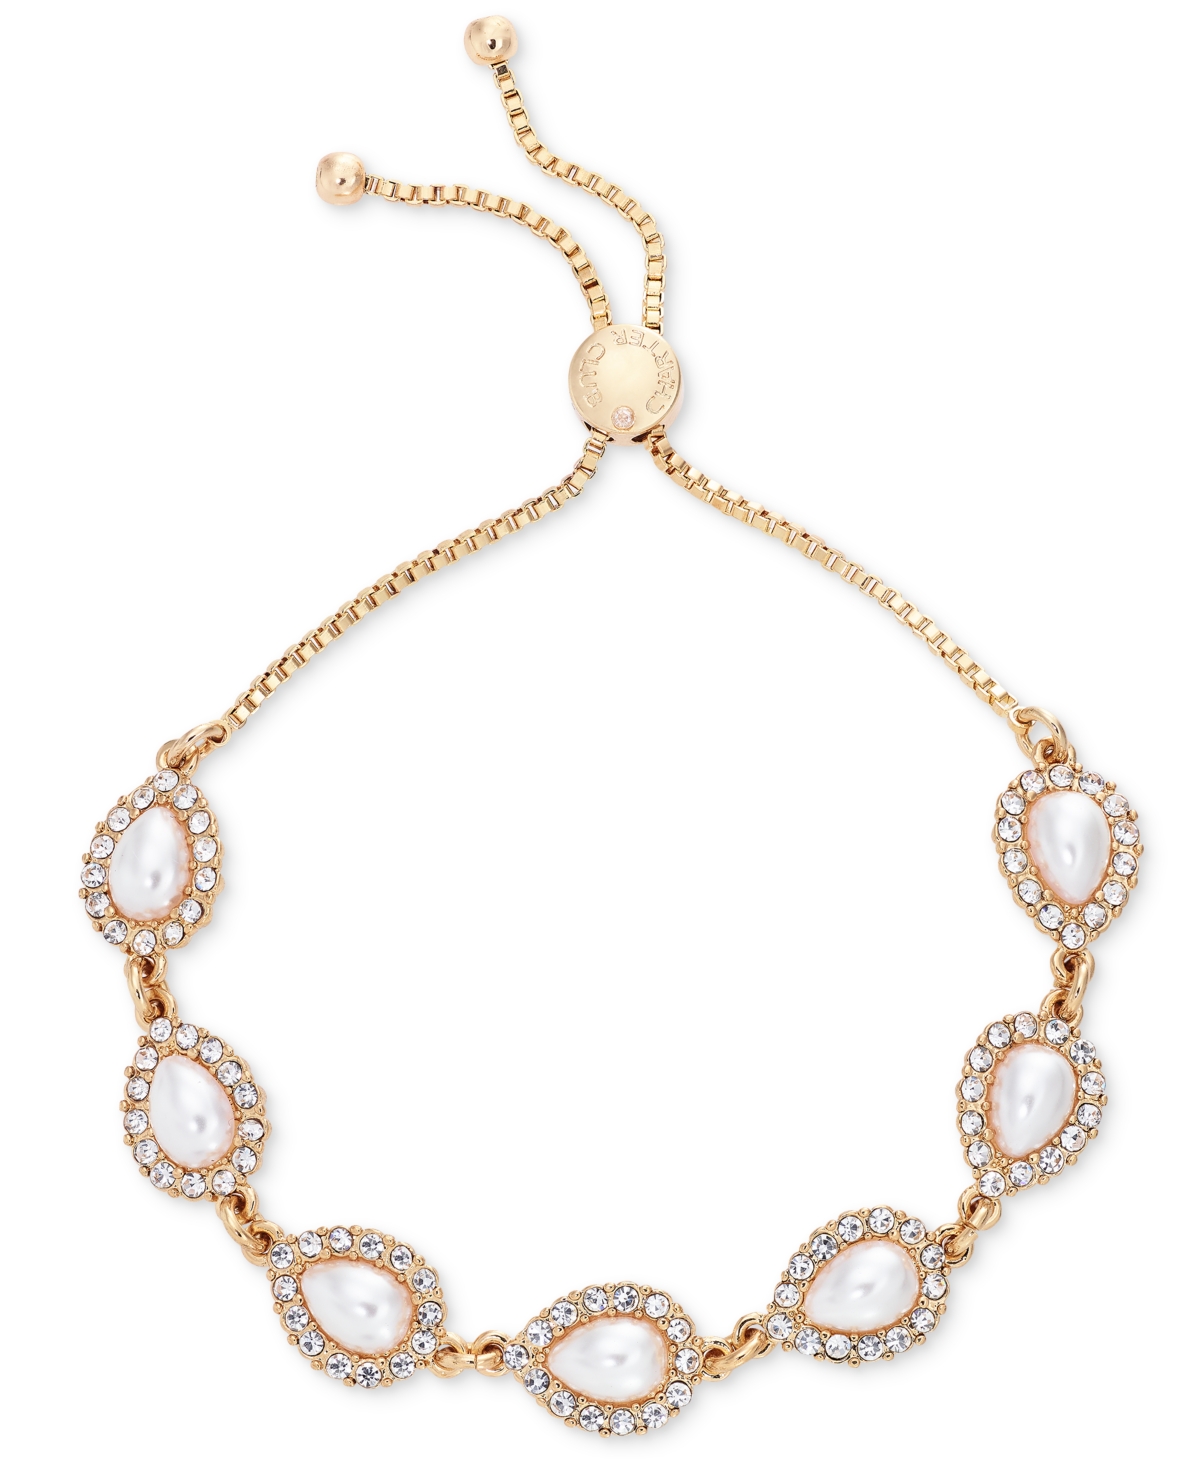 Gold-Tone Pave & Color Imitation Pearl Slider Bracelet, Created for Macy's - White